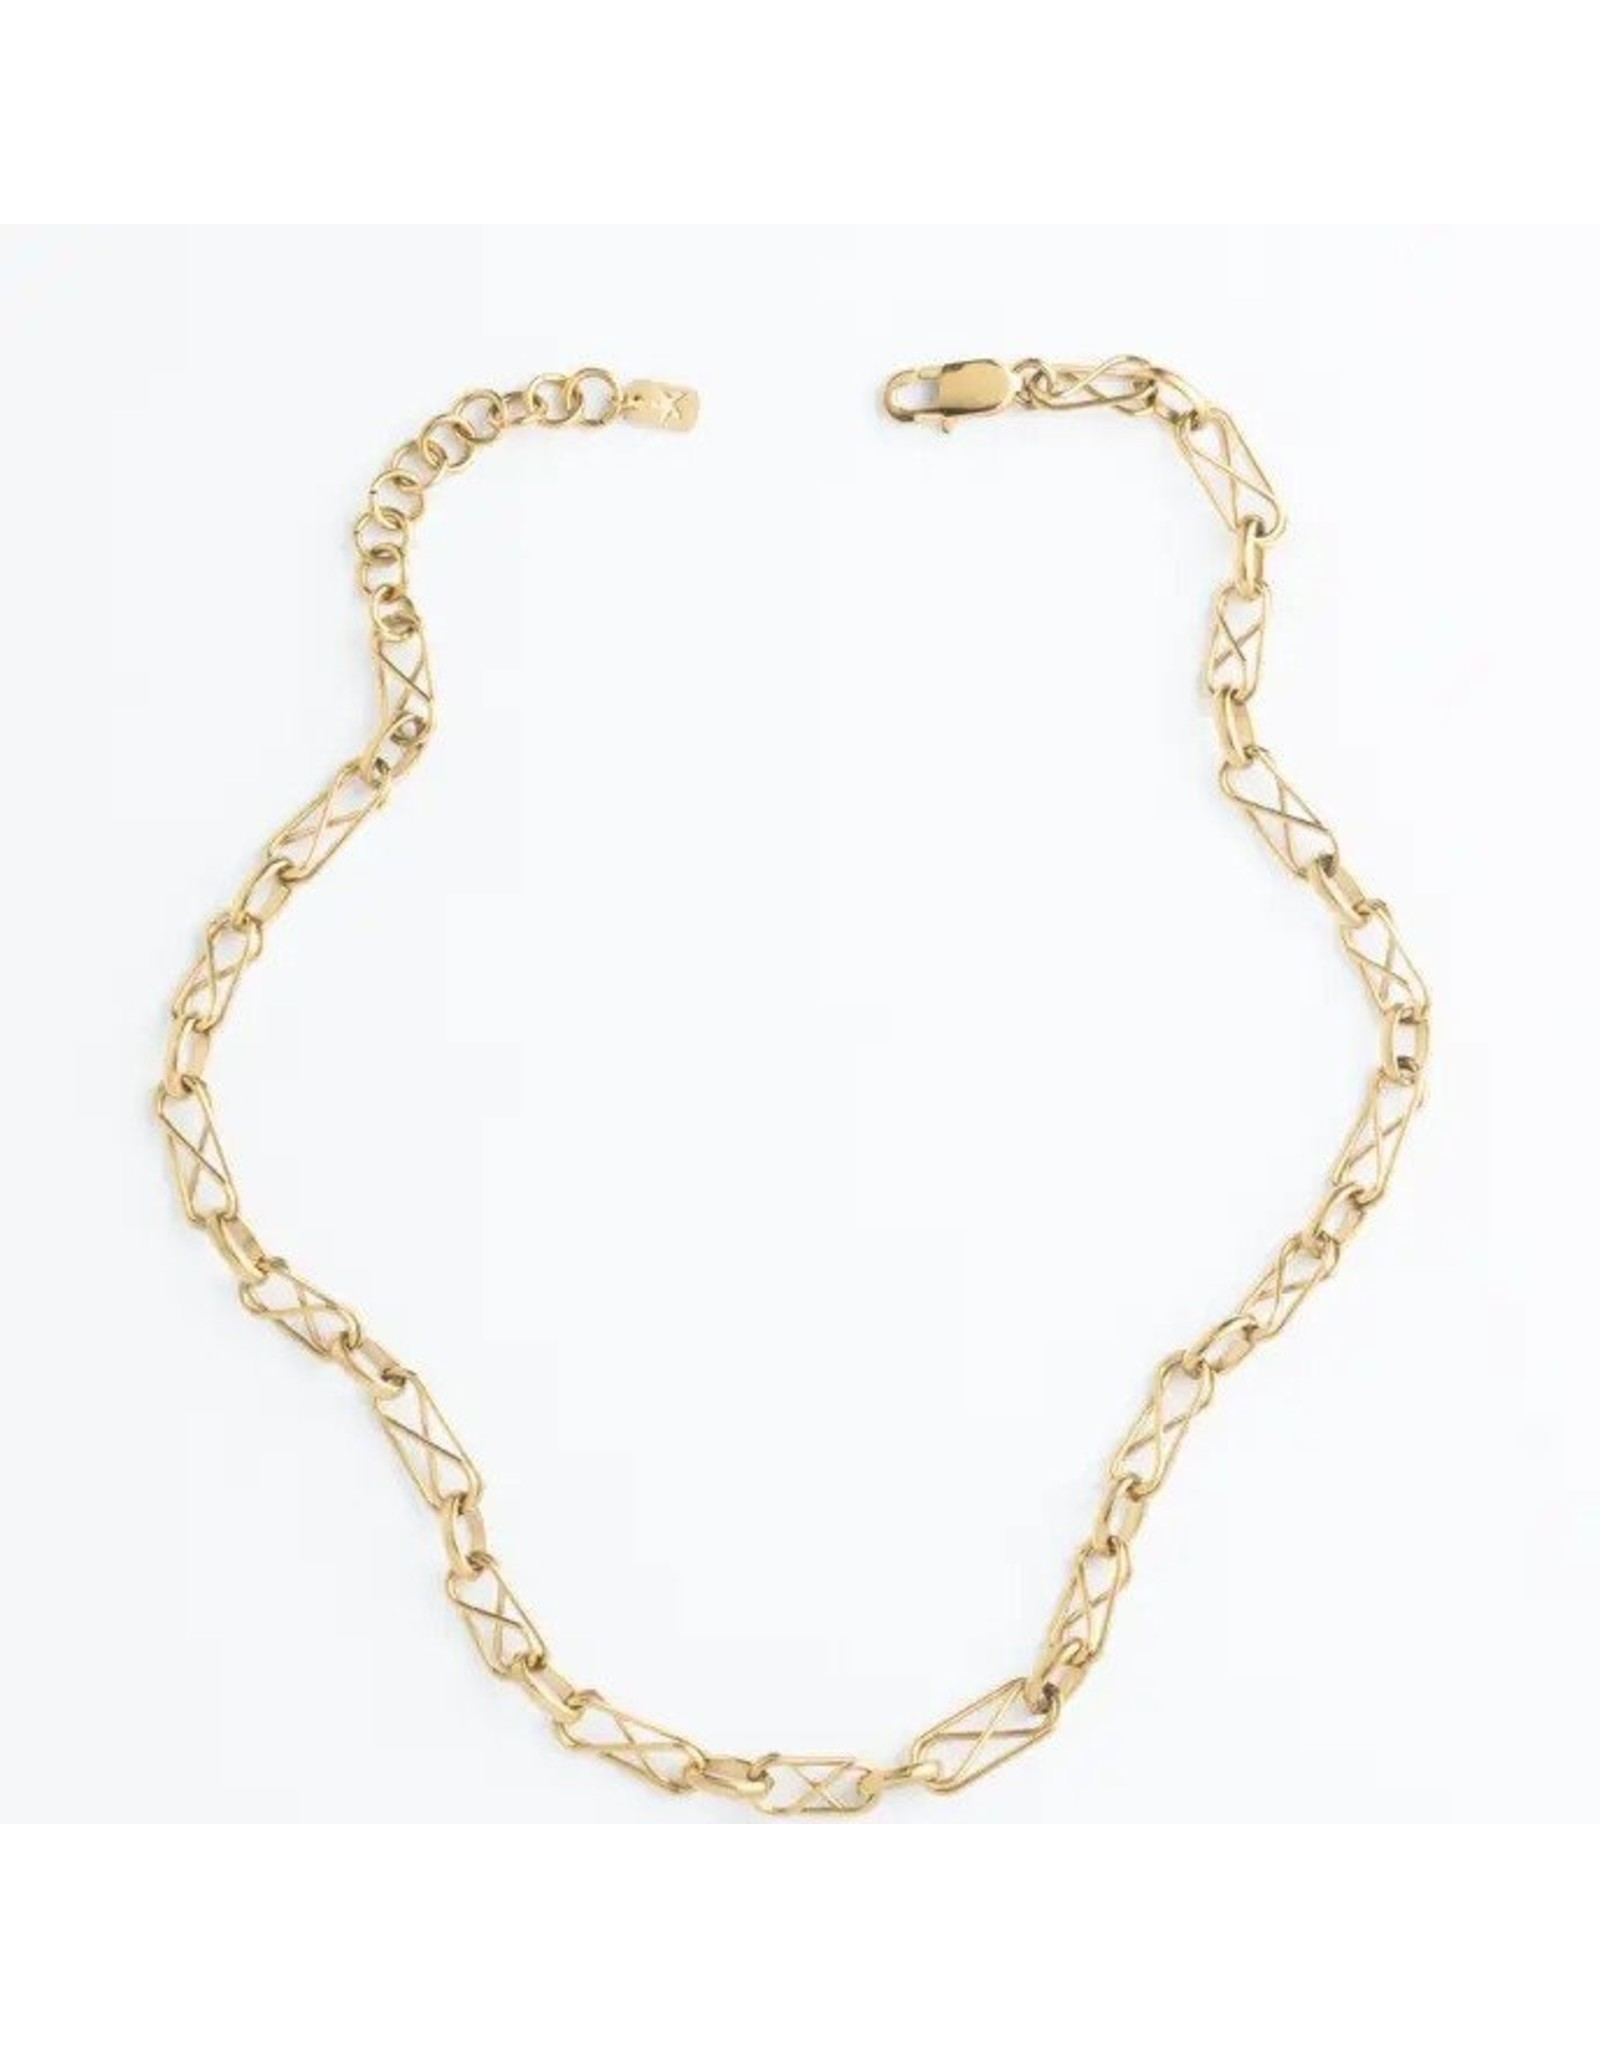 Trade roots Infinity Gold Chain Necklace, Asia